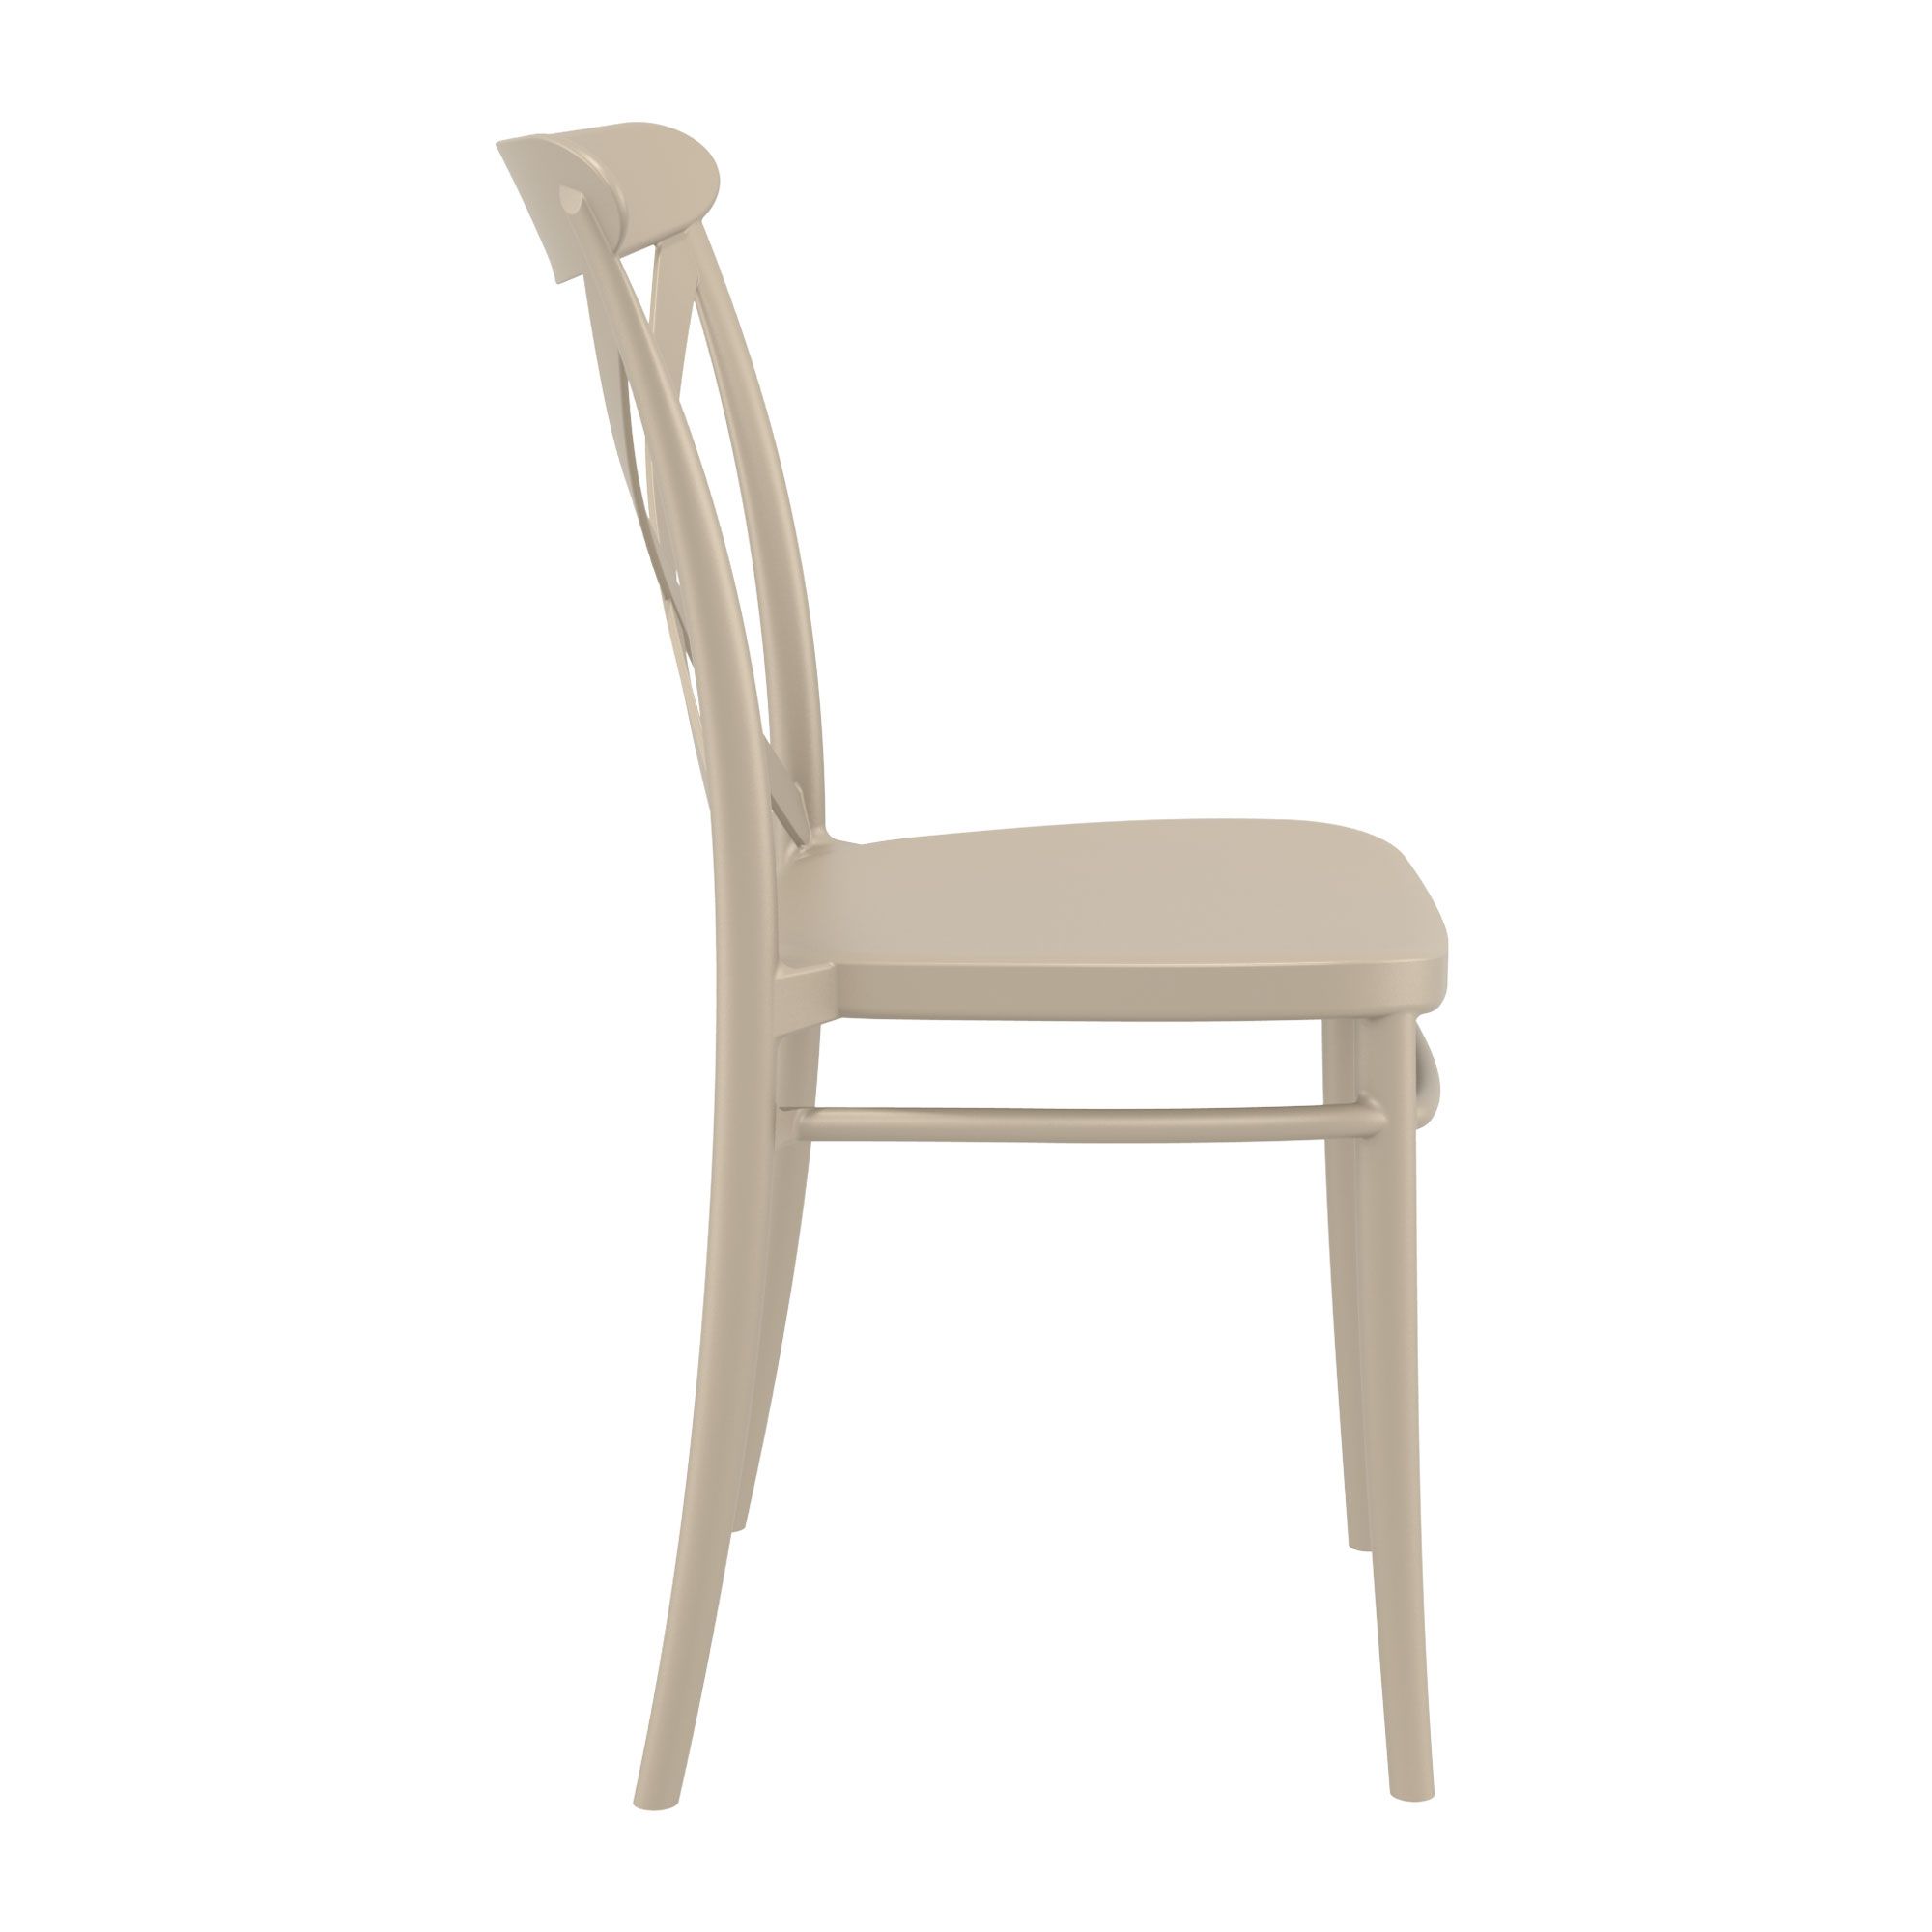 Taupe Criss Stackable Chair for Indoor or Outdoor Use - Side View